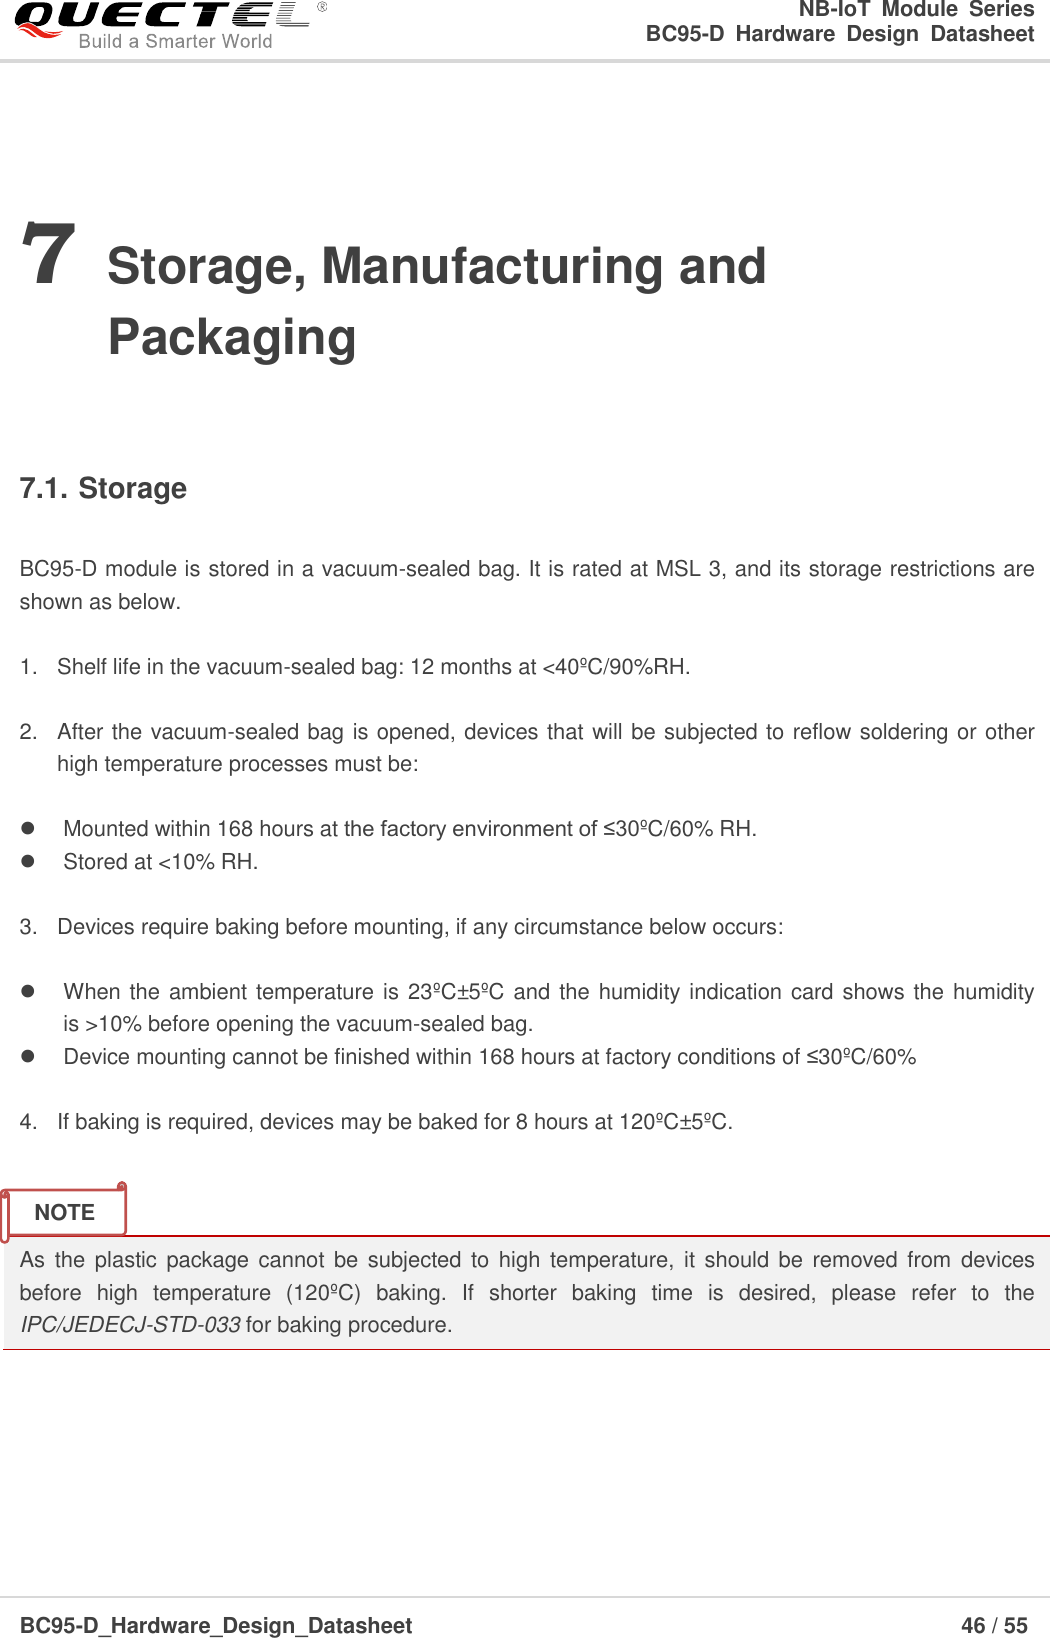                                                            NB-IoT  Module  Series                                                          BC95-D  Hardware  Design  Datasheet BC95-D_Hardware_Design_Datasheet                                                                    46 / 55    7 Storage, Manufacturing and Packaging  7.1. Storage  BC95-D module is stored in a vacuum-sealed bag. It is rated at MSL 3, and its storage restrictions are shown as below.  1.  Shelf life in the vacuum-sealed bag: 12 months at &lt;40ºC /90%RH.  2.  After the vacuum-sealed bag is opened, devices that will be subjected to reflow soldering or other high temperature processes must be:      Mounted within 168 hours at the factory environment of ≤30ºC /60% RH.   Stored at &lt;10% RH.  3.  Devices require baking before mounting, if any circumstance below occurs:    When the ambient temperature is 23ºC ±5 ºC  and the humidity indication card shows the humidity is &gt;10% before opening the vacuum-sealed bag.    Device mounting cannot be finished within 168 hours at factory conditions of ≤30ºC /60%  4.  If baking is required, devices may be baked for 8 hours at 120ºC ±5 ºC .   As  the plastic package cannot  be  subjected to  high  temperature, it should  be  removed from devices before  high  temperature  (120ºC )  baking.  If  shorter  baking  time  is  desired,  please  refer  to  the IPC/JEDECJ-STD-033 for baking procedure.      NOTE 